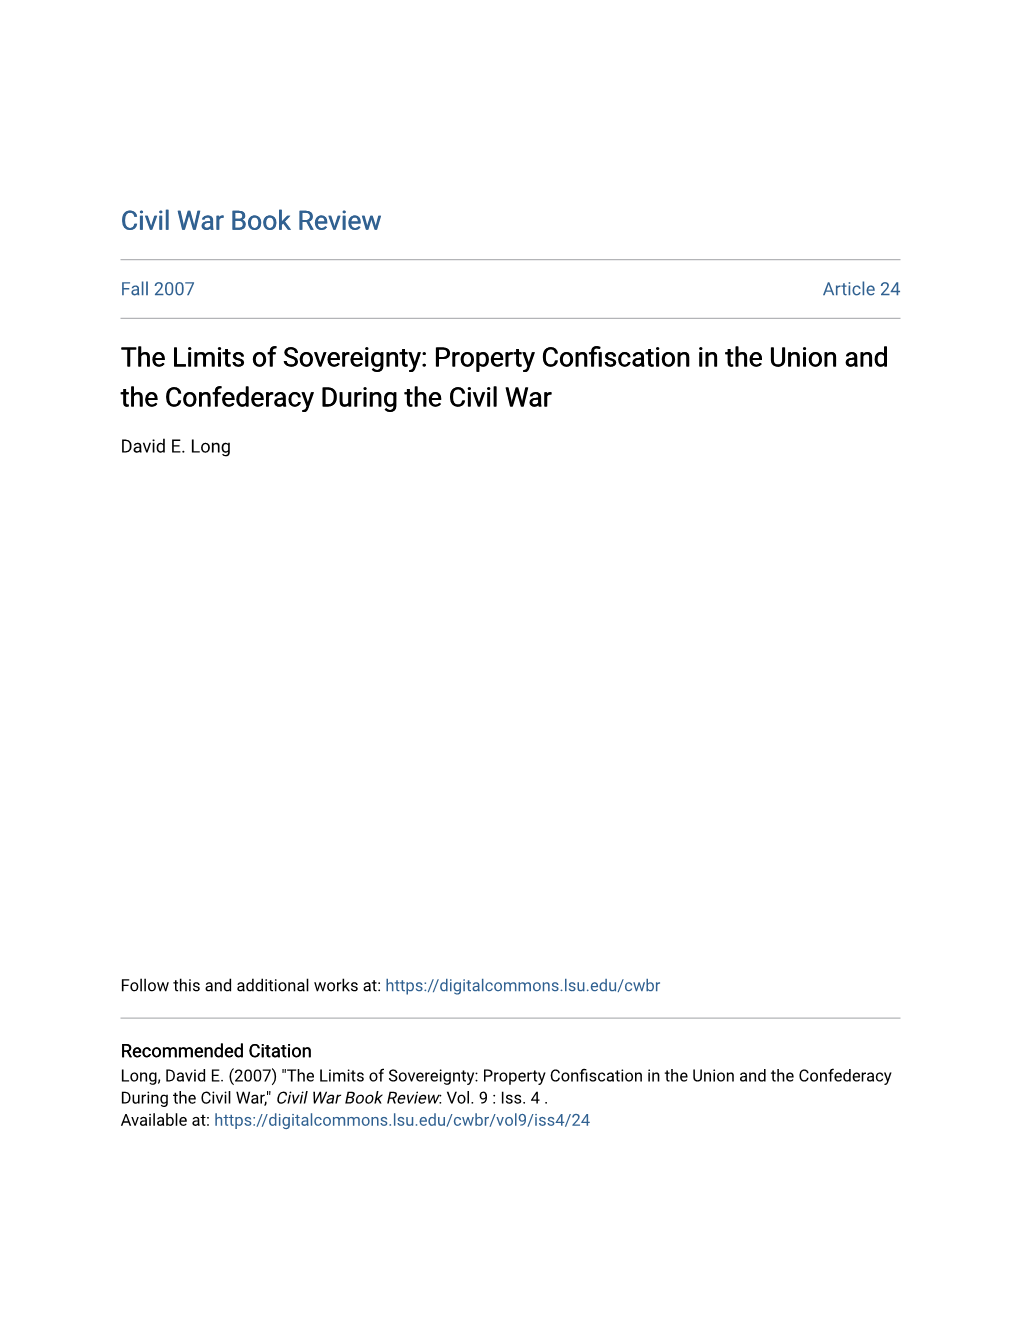 The Limits of Sovereignty: Property Confiscation in the Union and the Confederacy During the Civil War